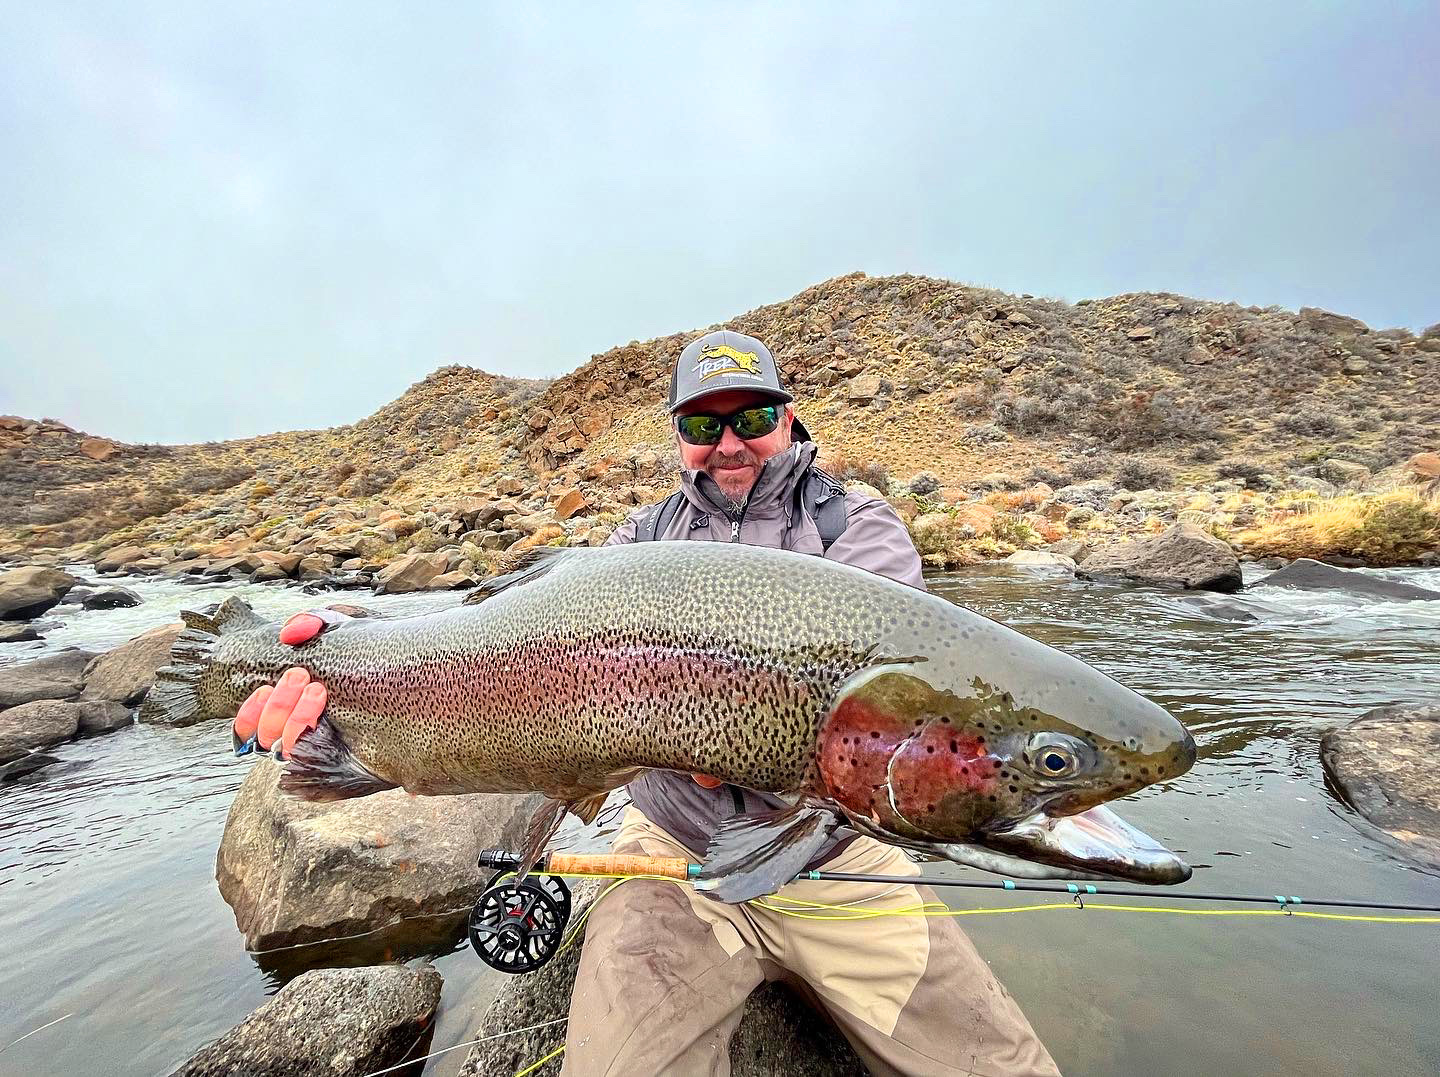 Strobel’s monster trout are an otherworldly experience